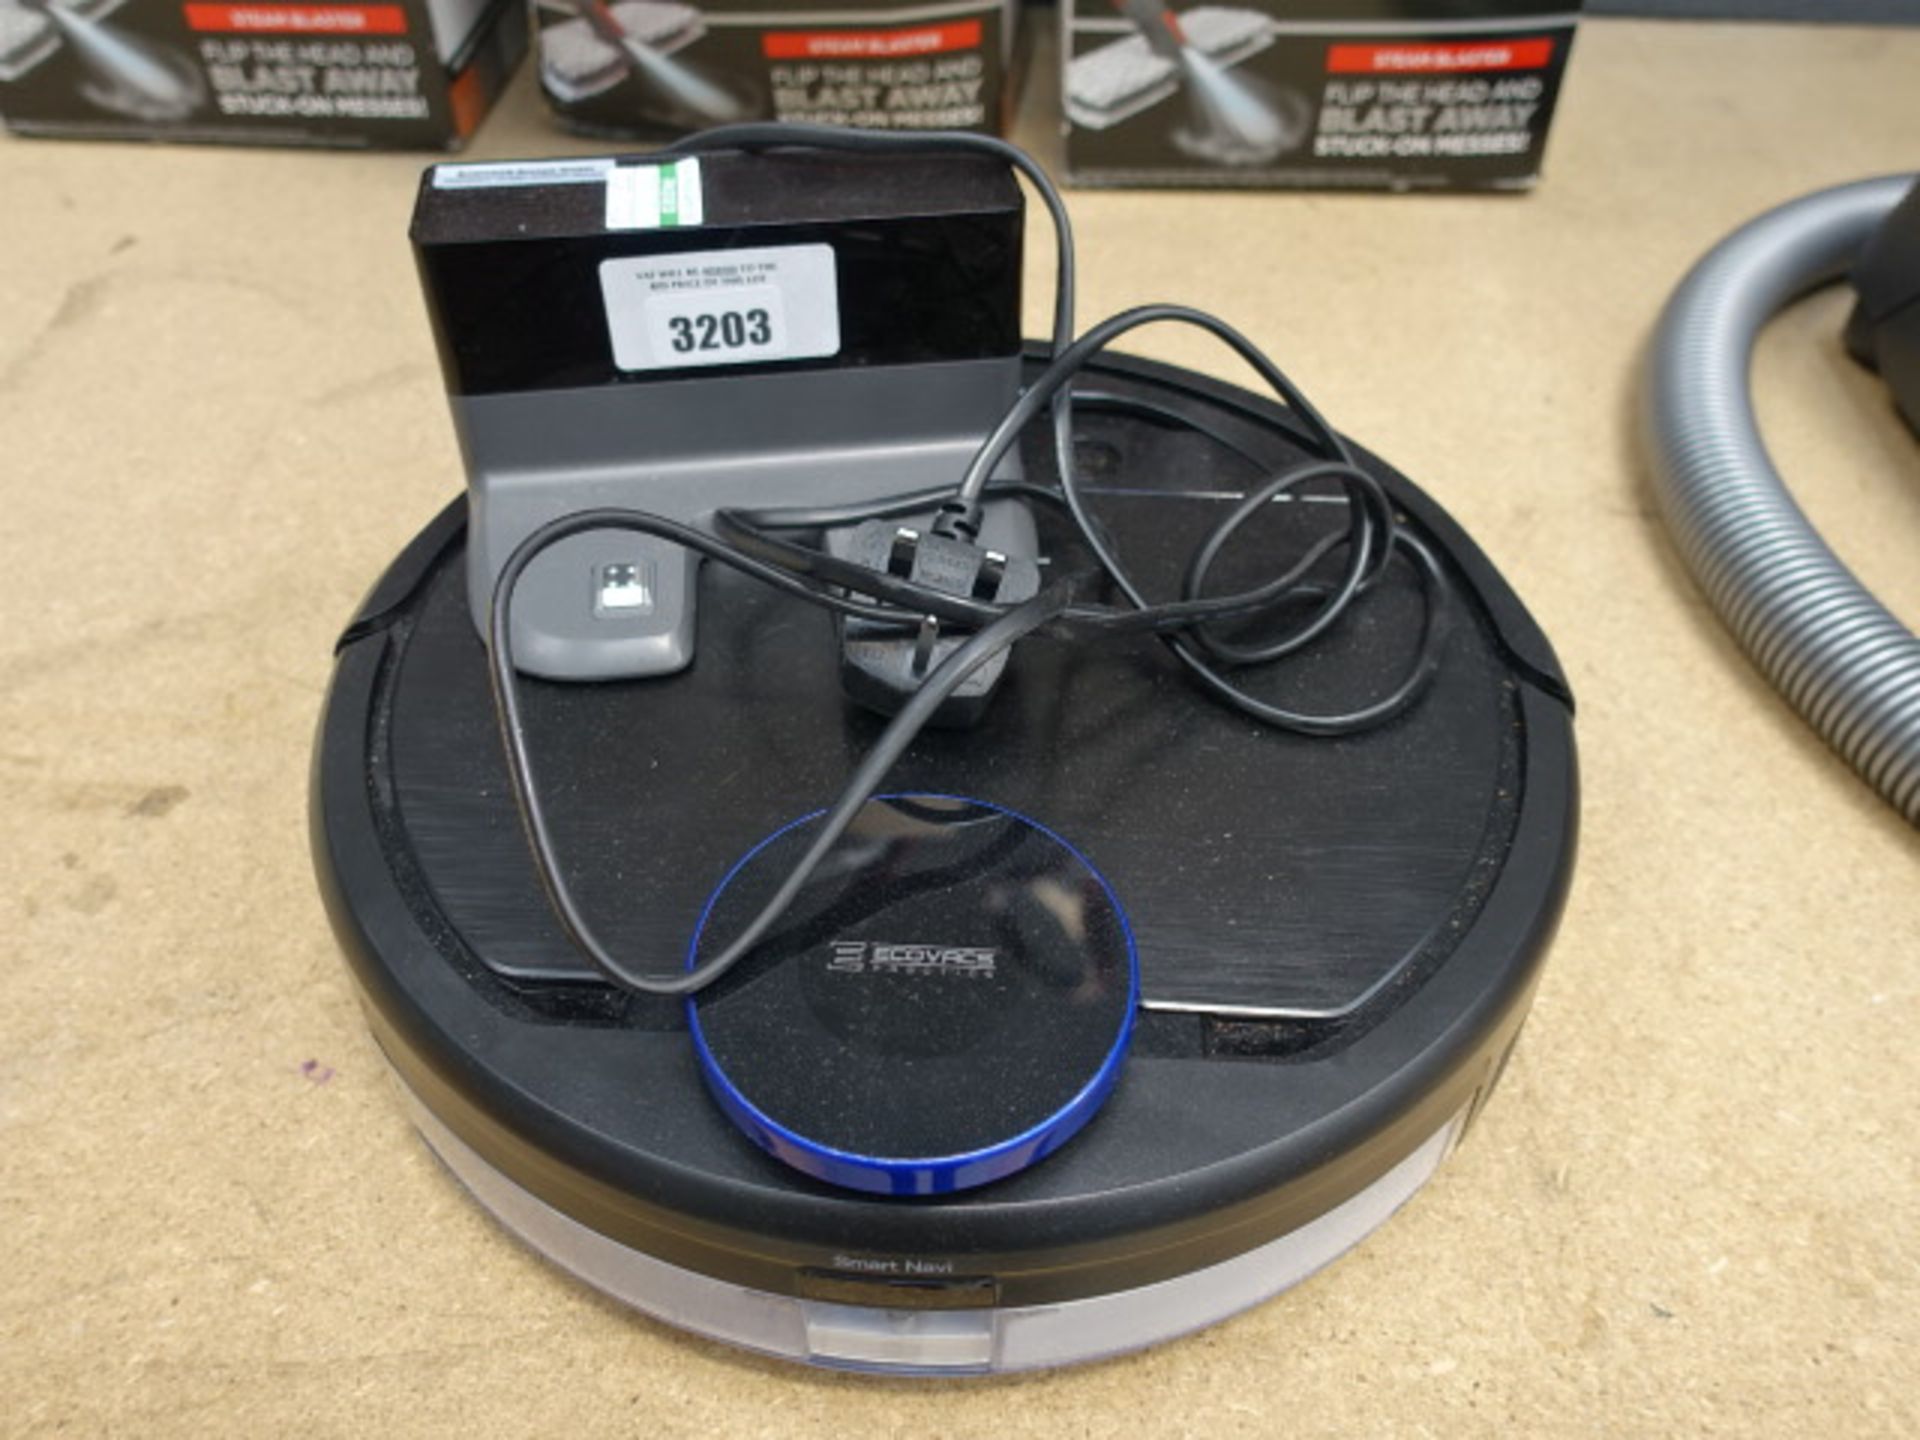 Unboxed Deebot 930 vacuum cleaning robot with charger